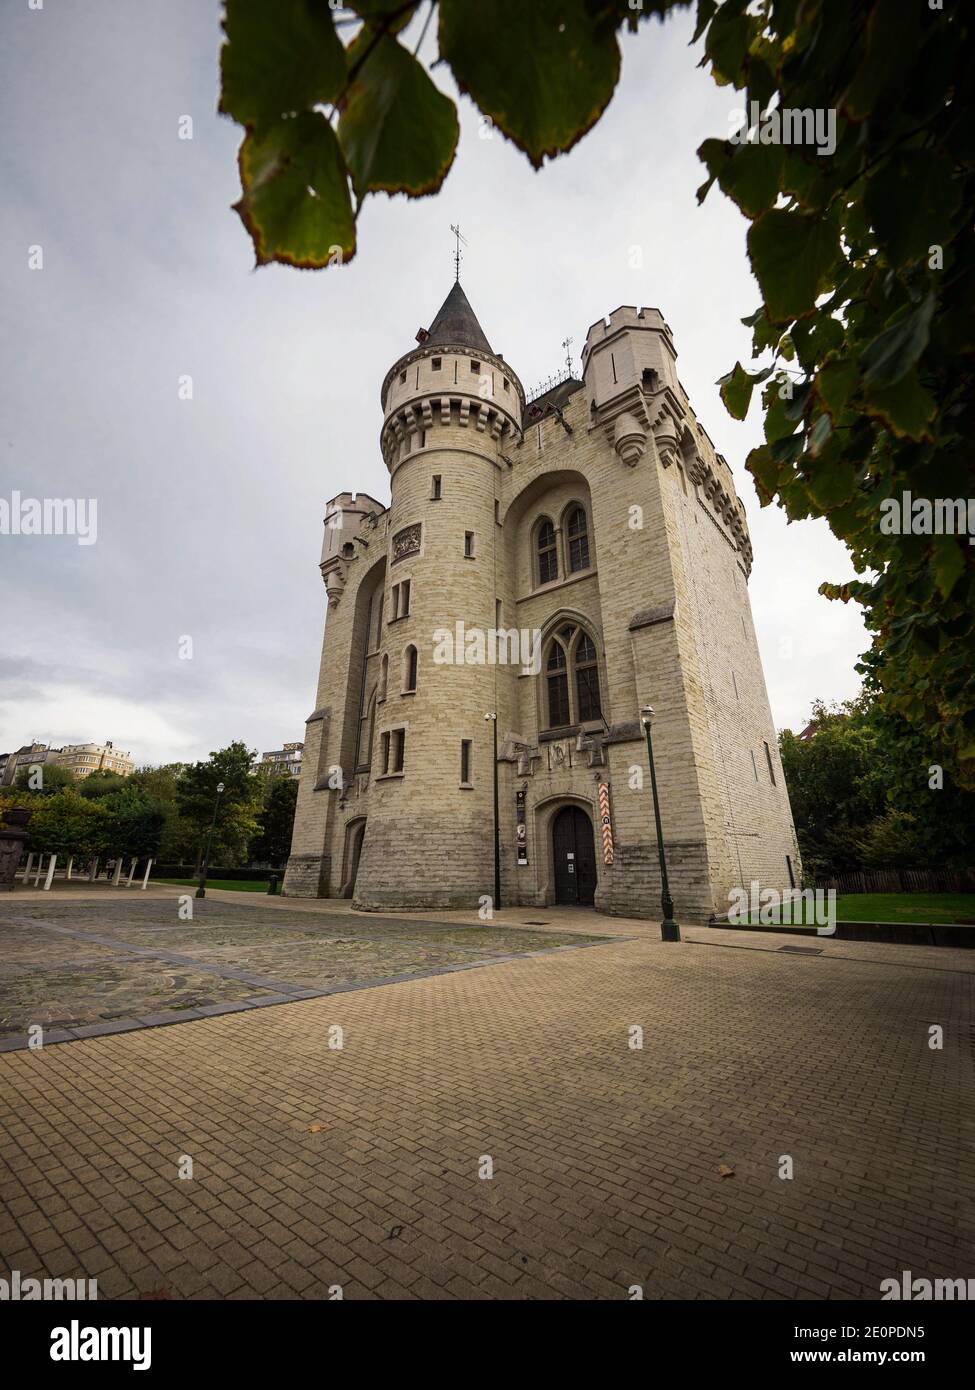 Panoramic view of medieval fortified city gate Halle Gate Porte de Hal  Hallepoort white urban stone castle tower Brussels Belgium Europe Stock  Photo - Alamy